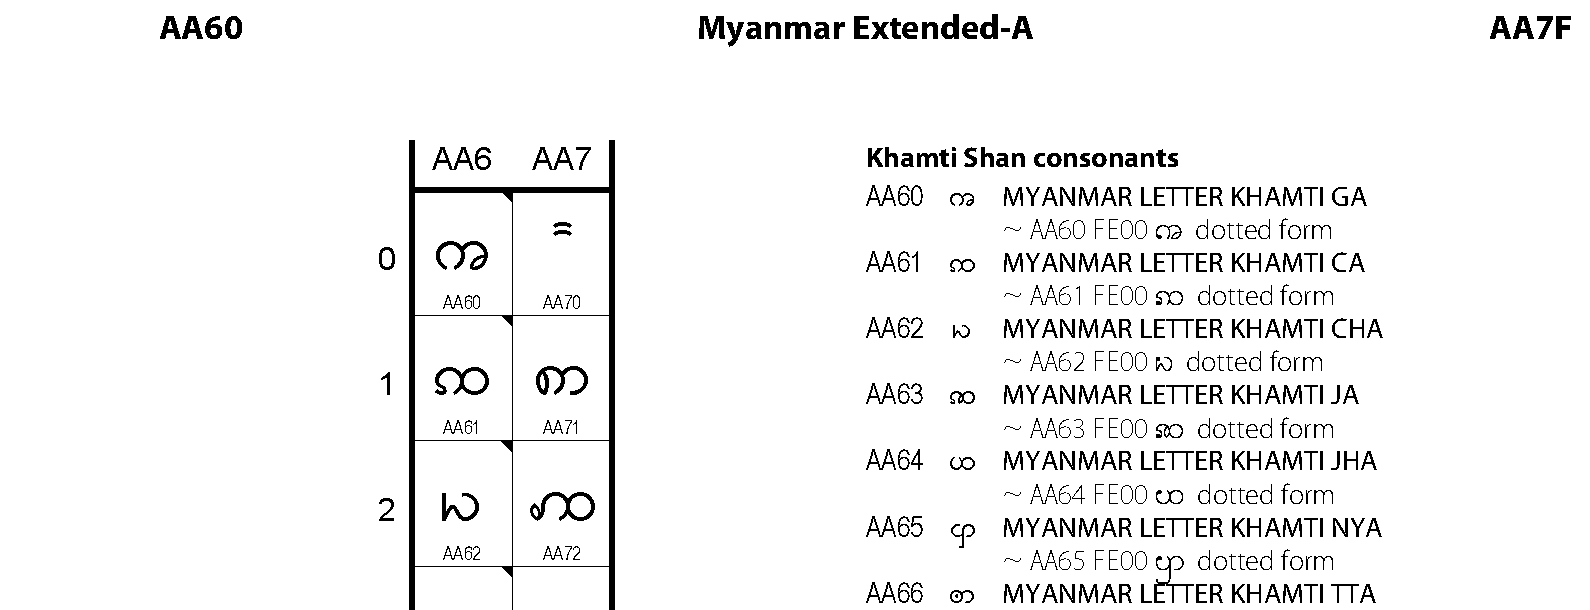 Unicode - Myanmar Extended-A